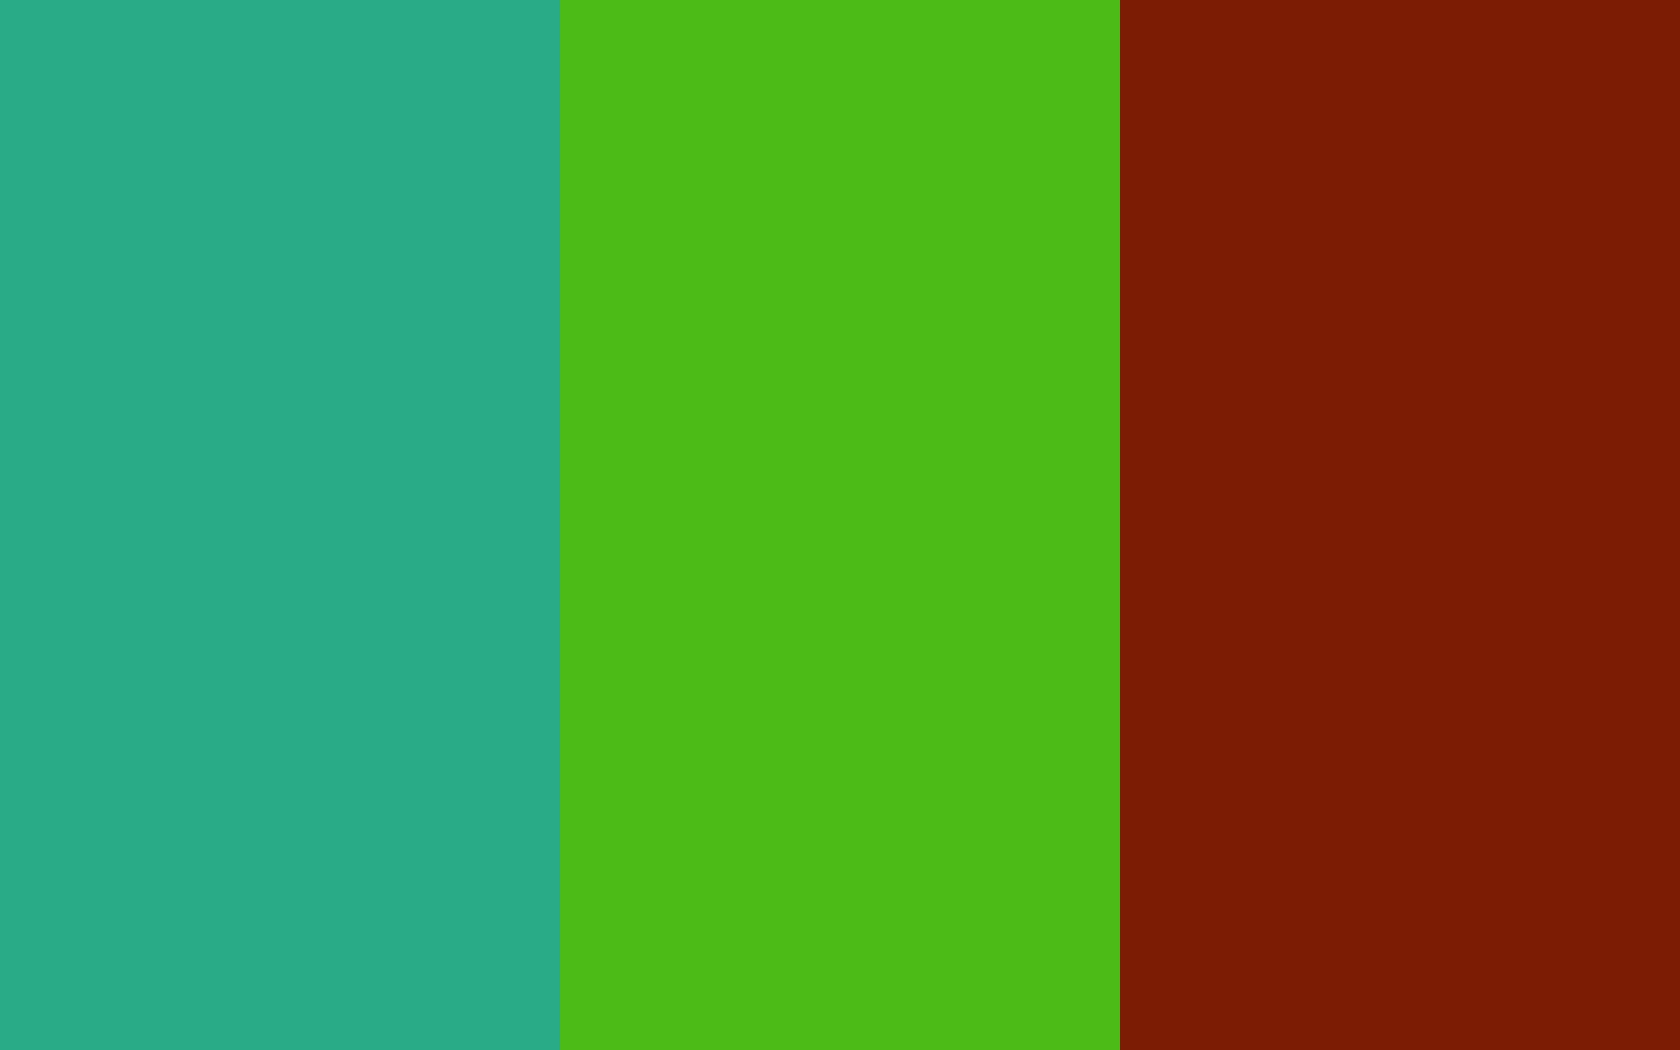 Free 1680x1050 resolution Jungle Green Kelly Green and Kenyan Copper 1680x1050